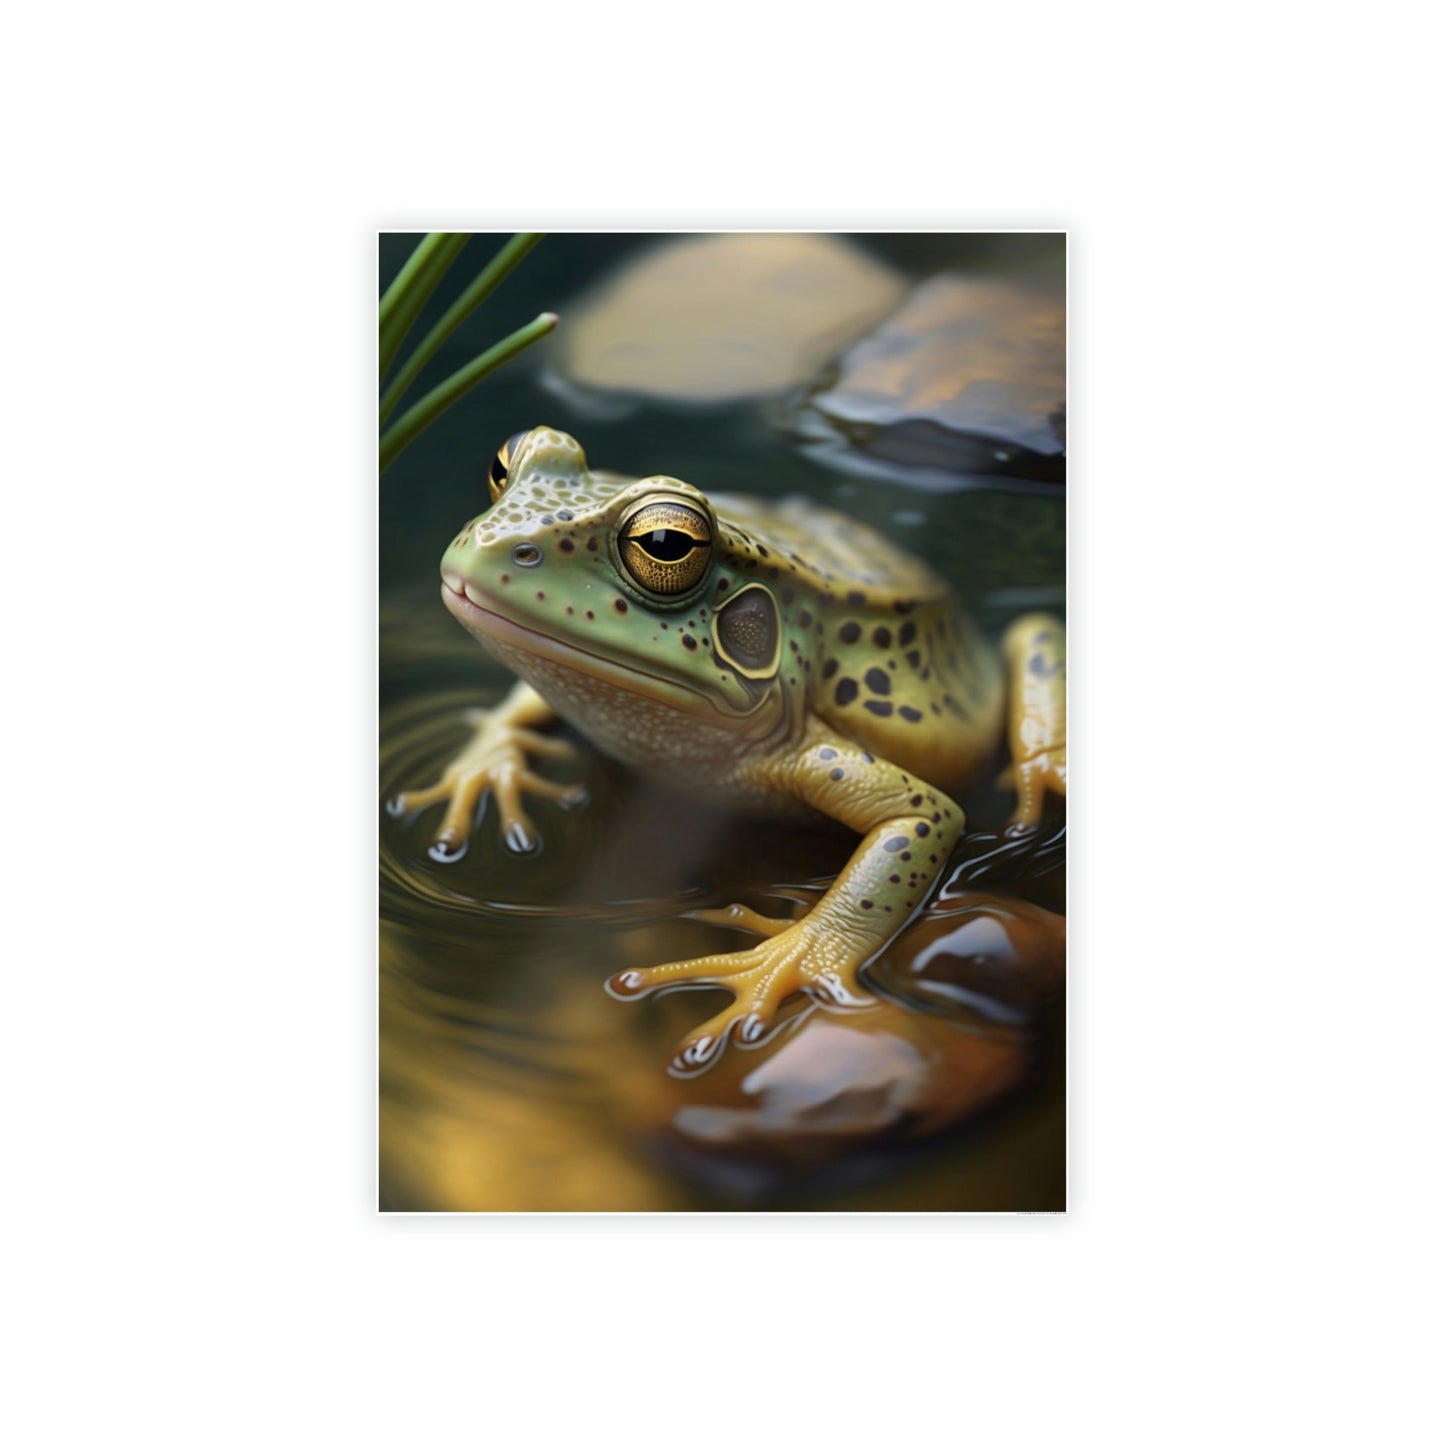 Frogs in Their Element: A Vivid Portrait of Amphibian Life